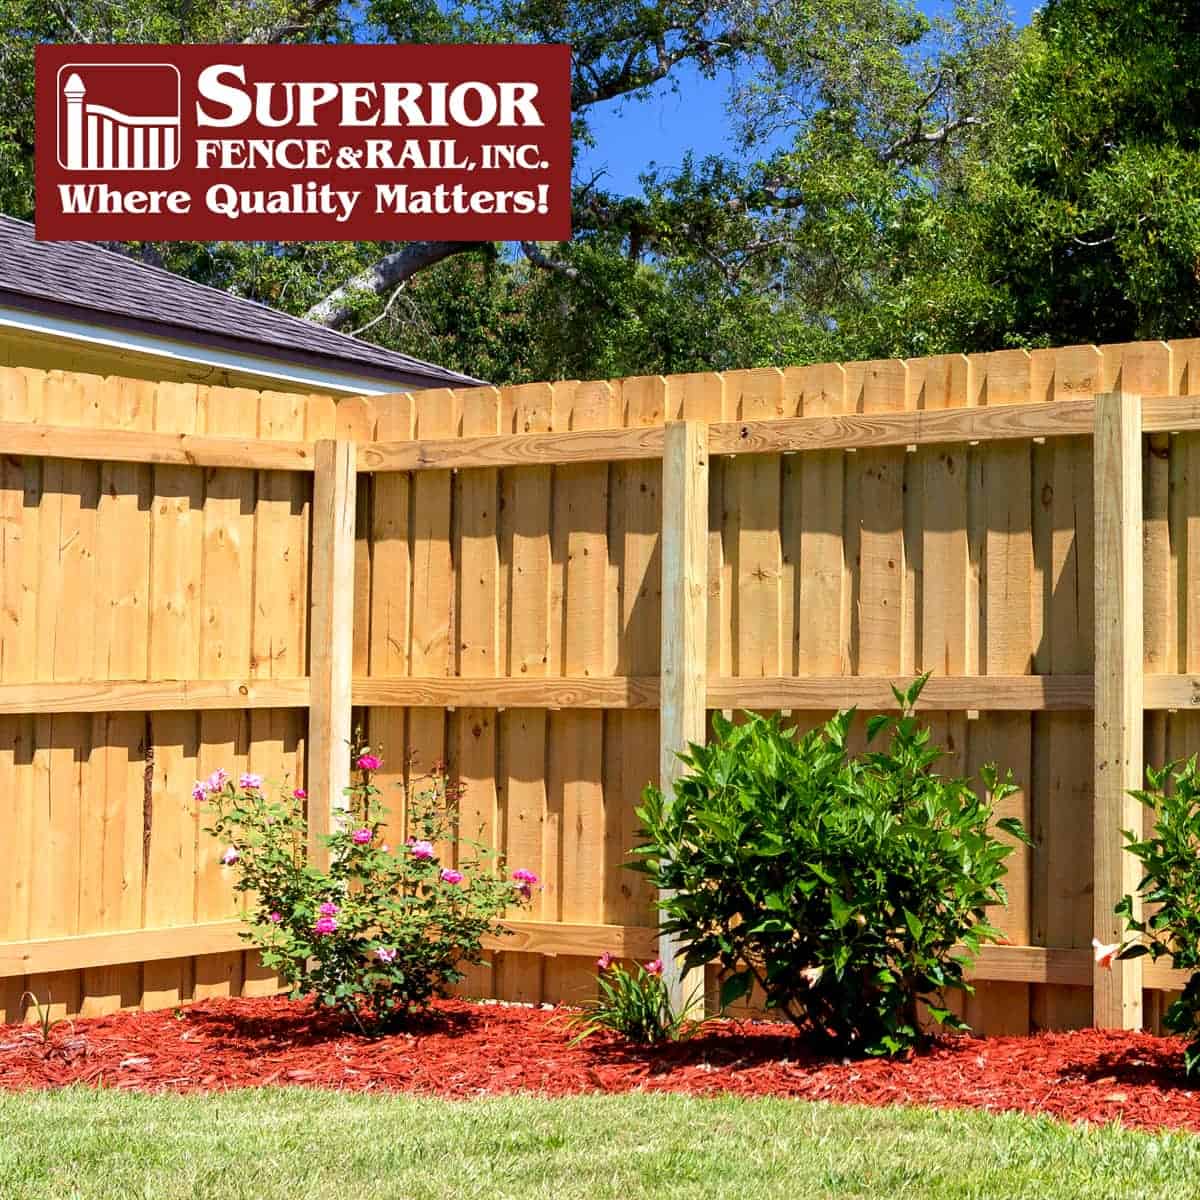 Mountain View fence company contractor